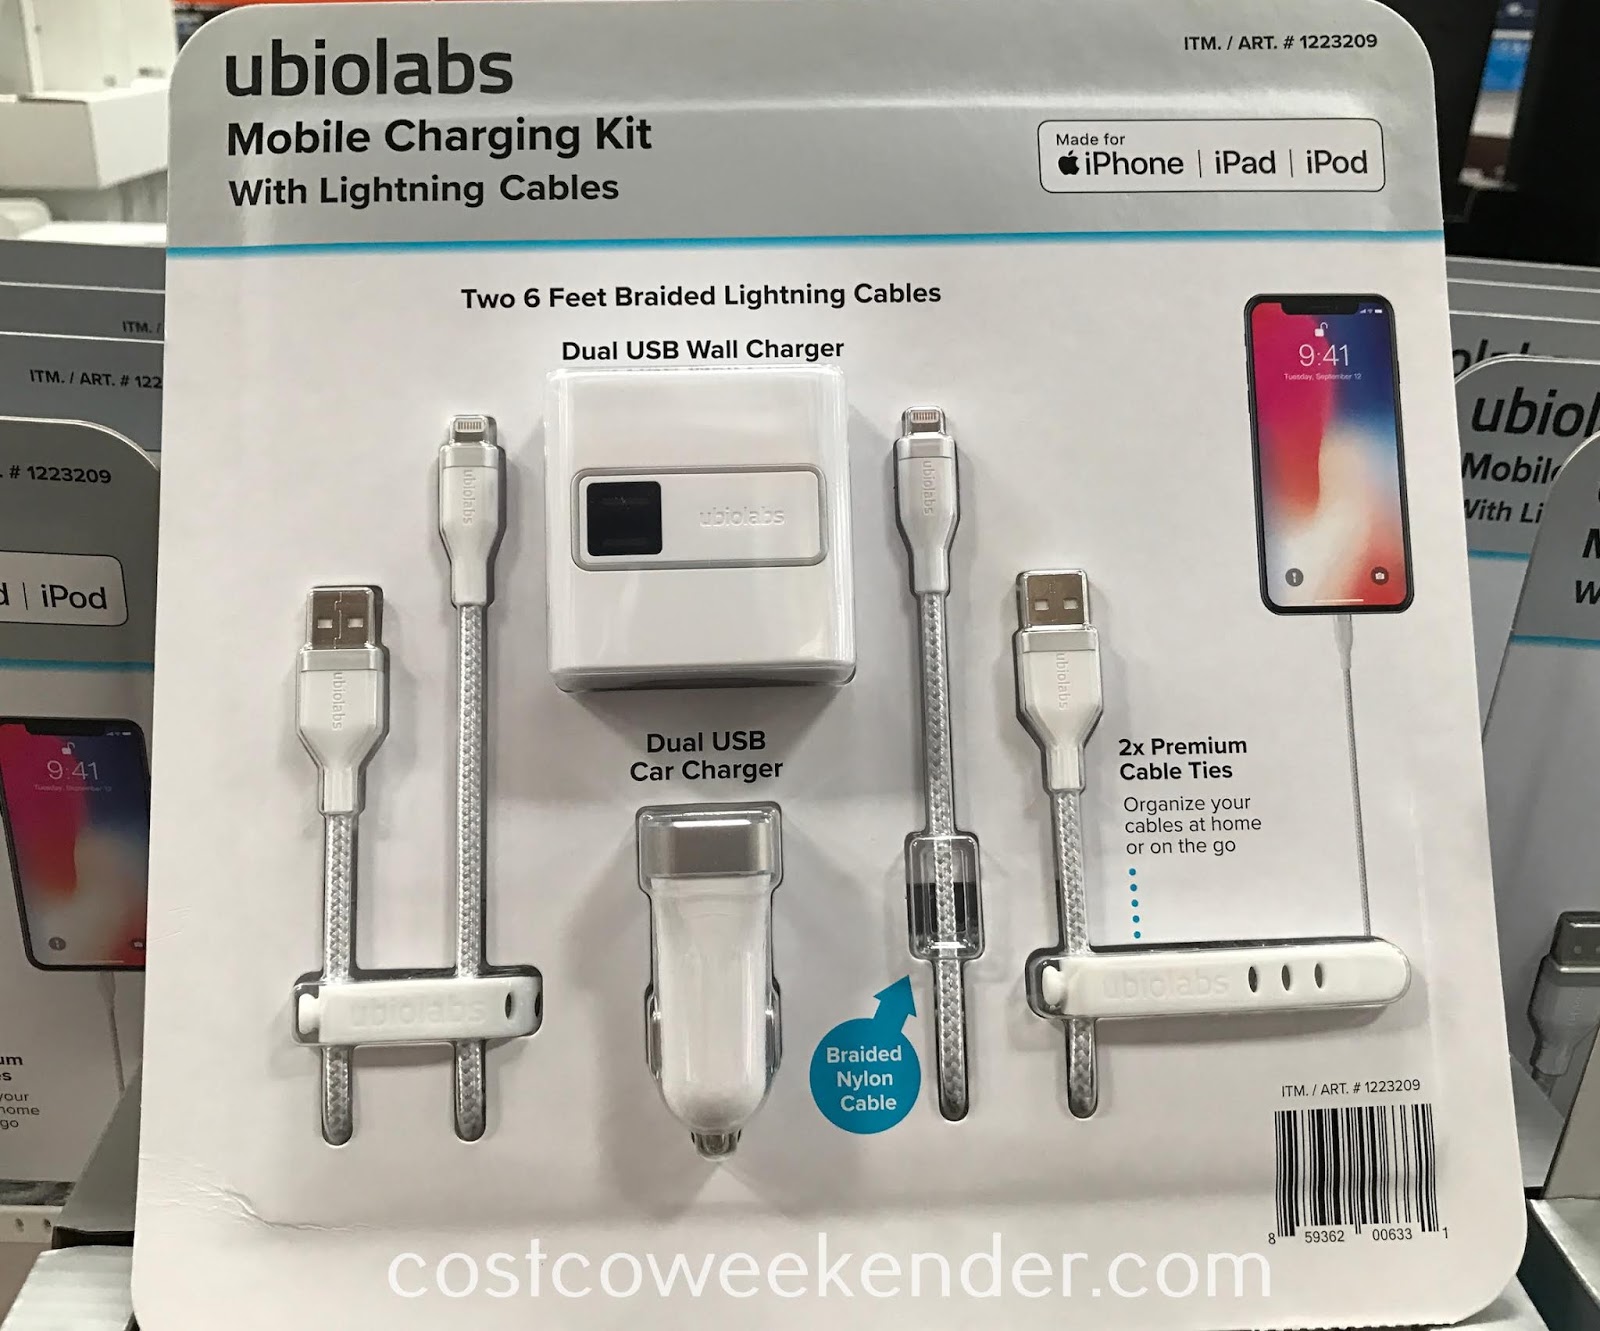 Ubio Labs Mobile Charging Kit with Lightning Cables | Costco Weekender